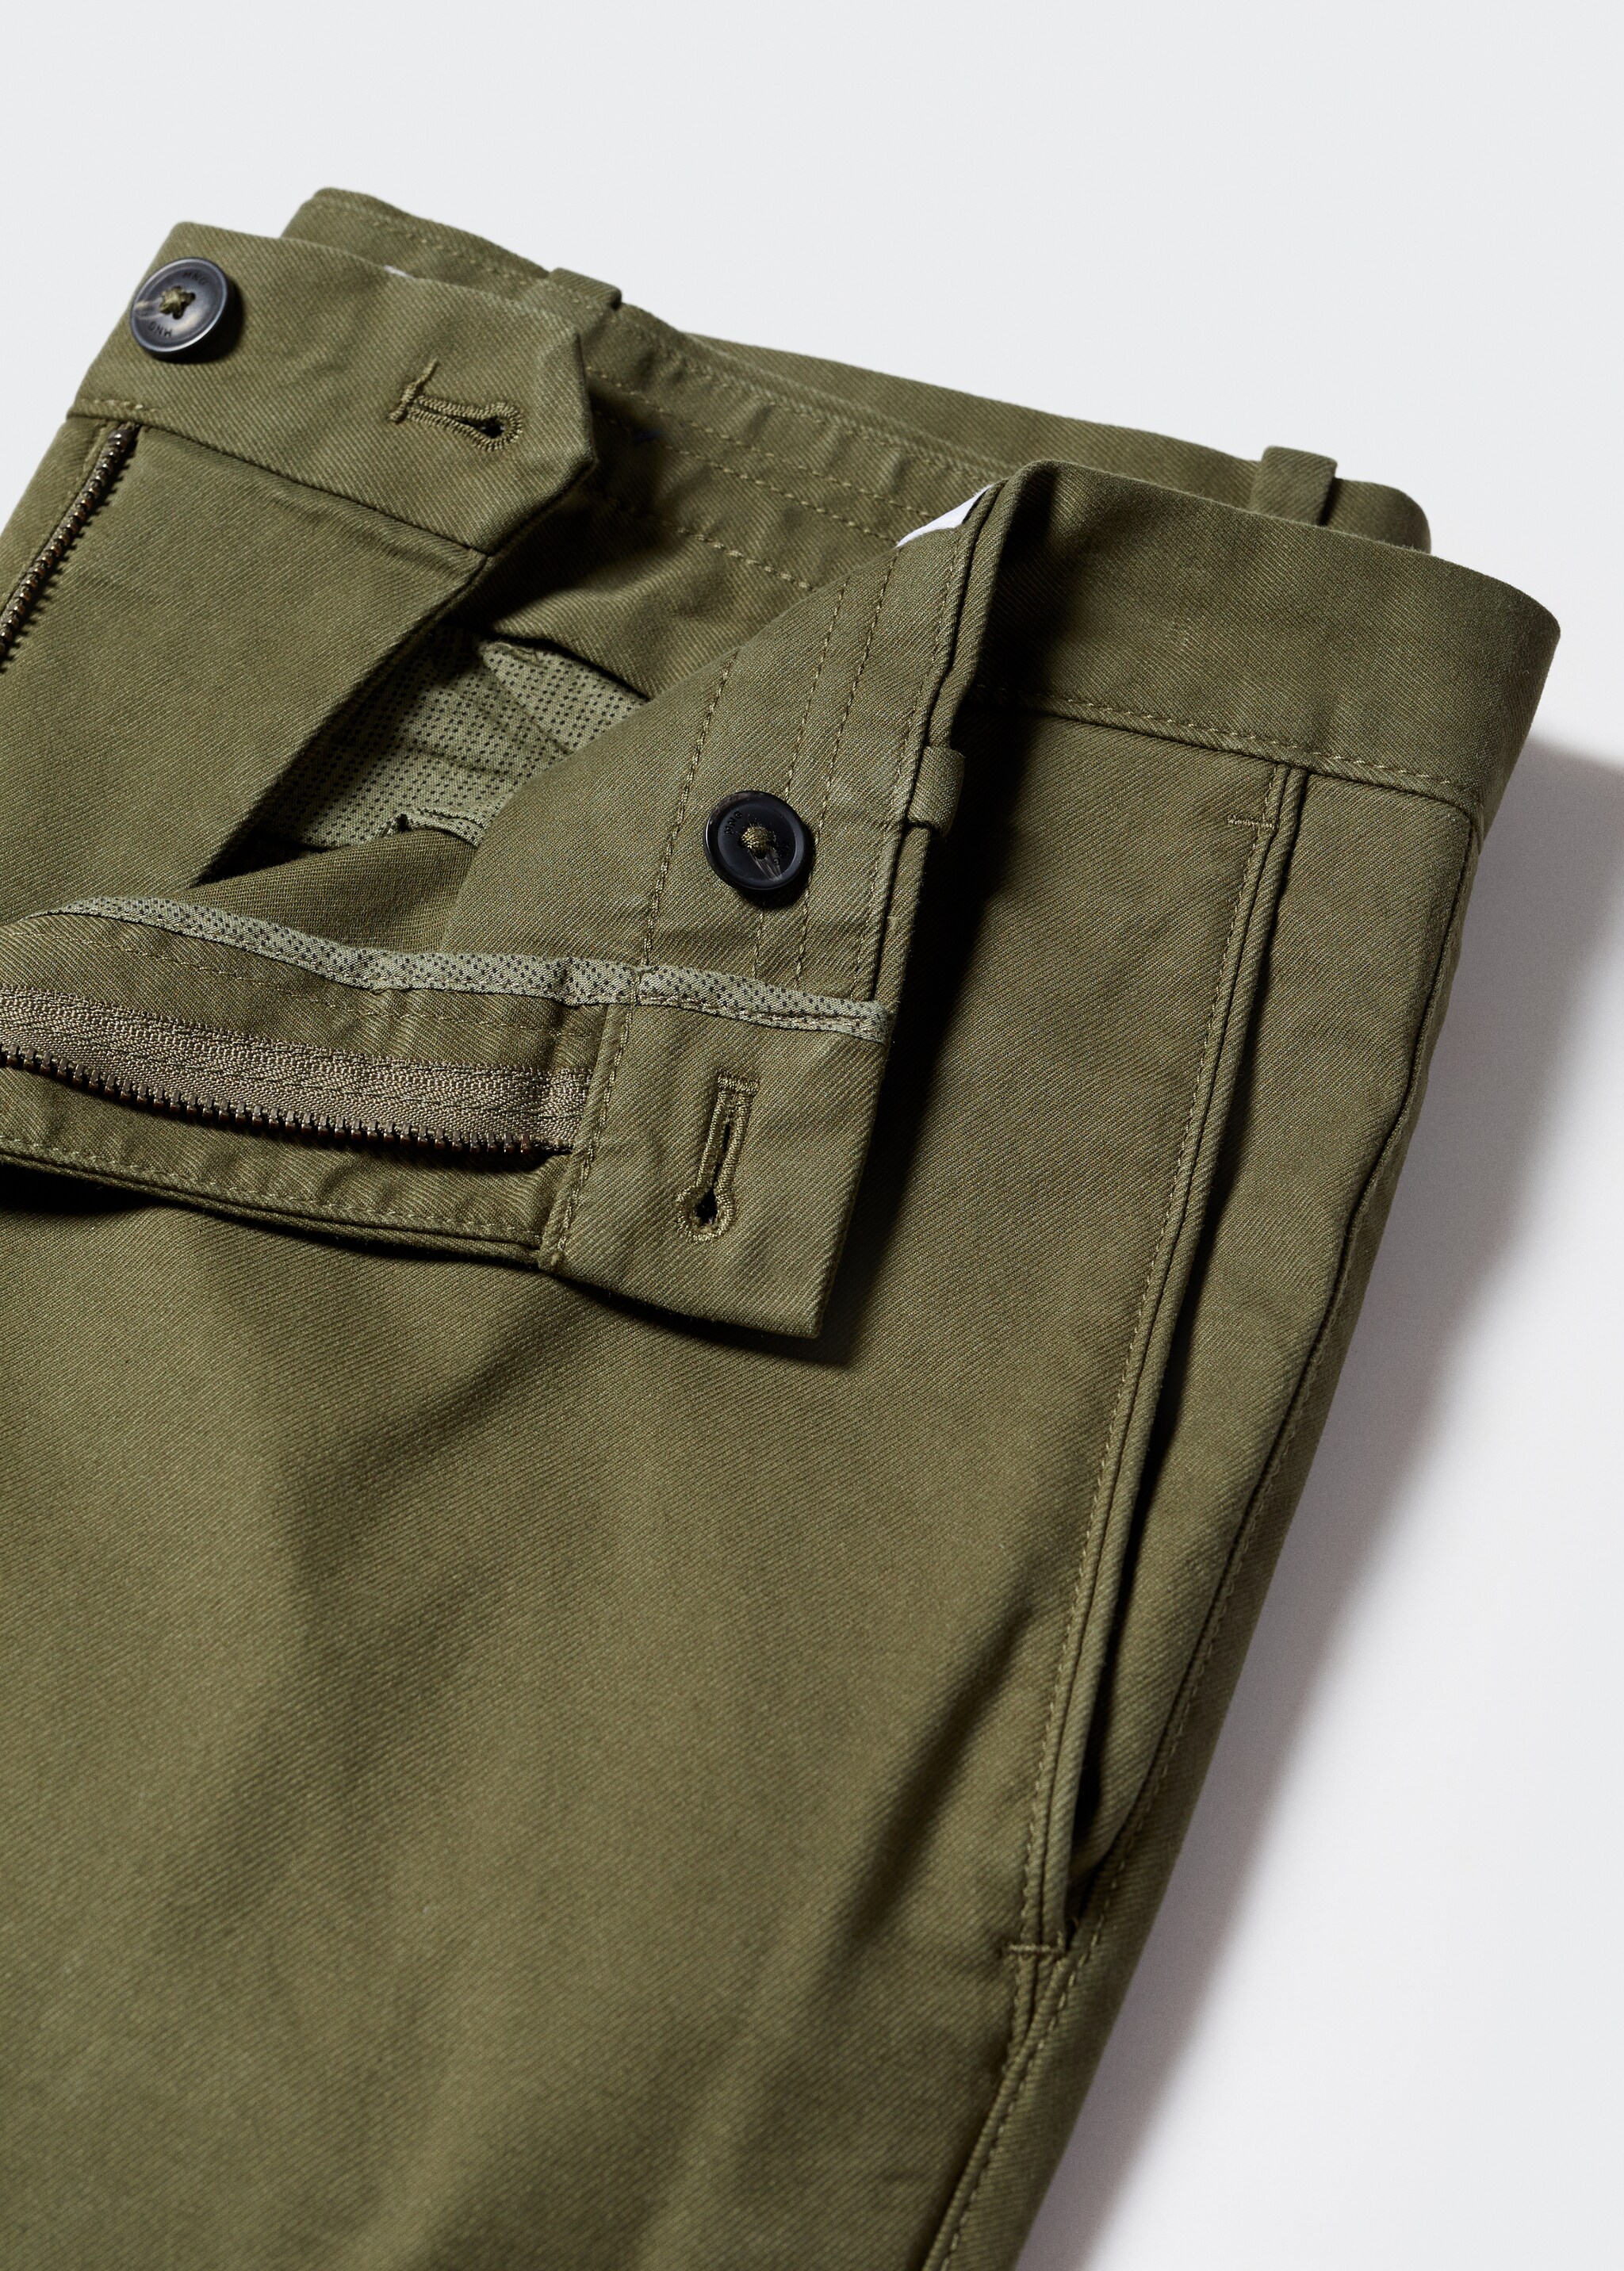 Slim fit serge chino trousers - Details of the article 8